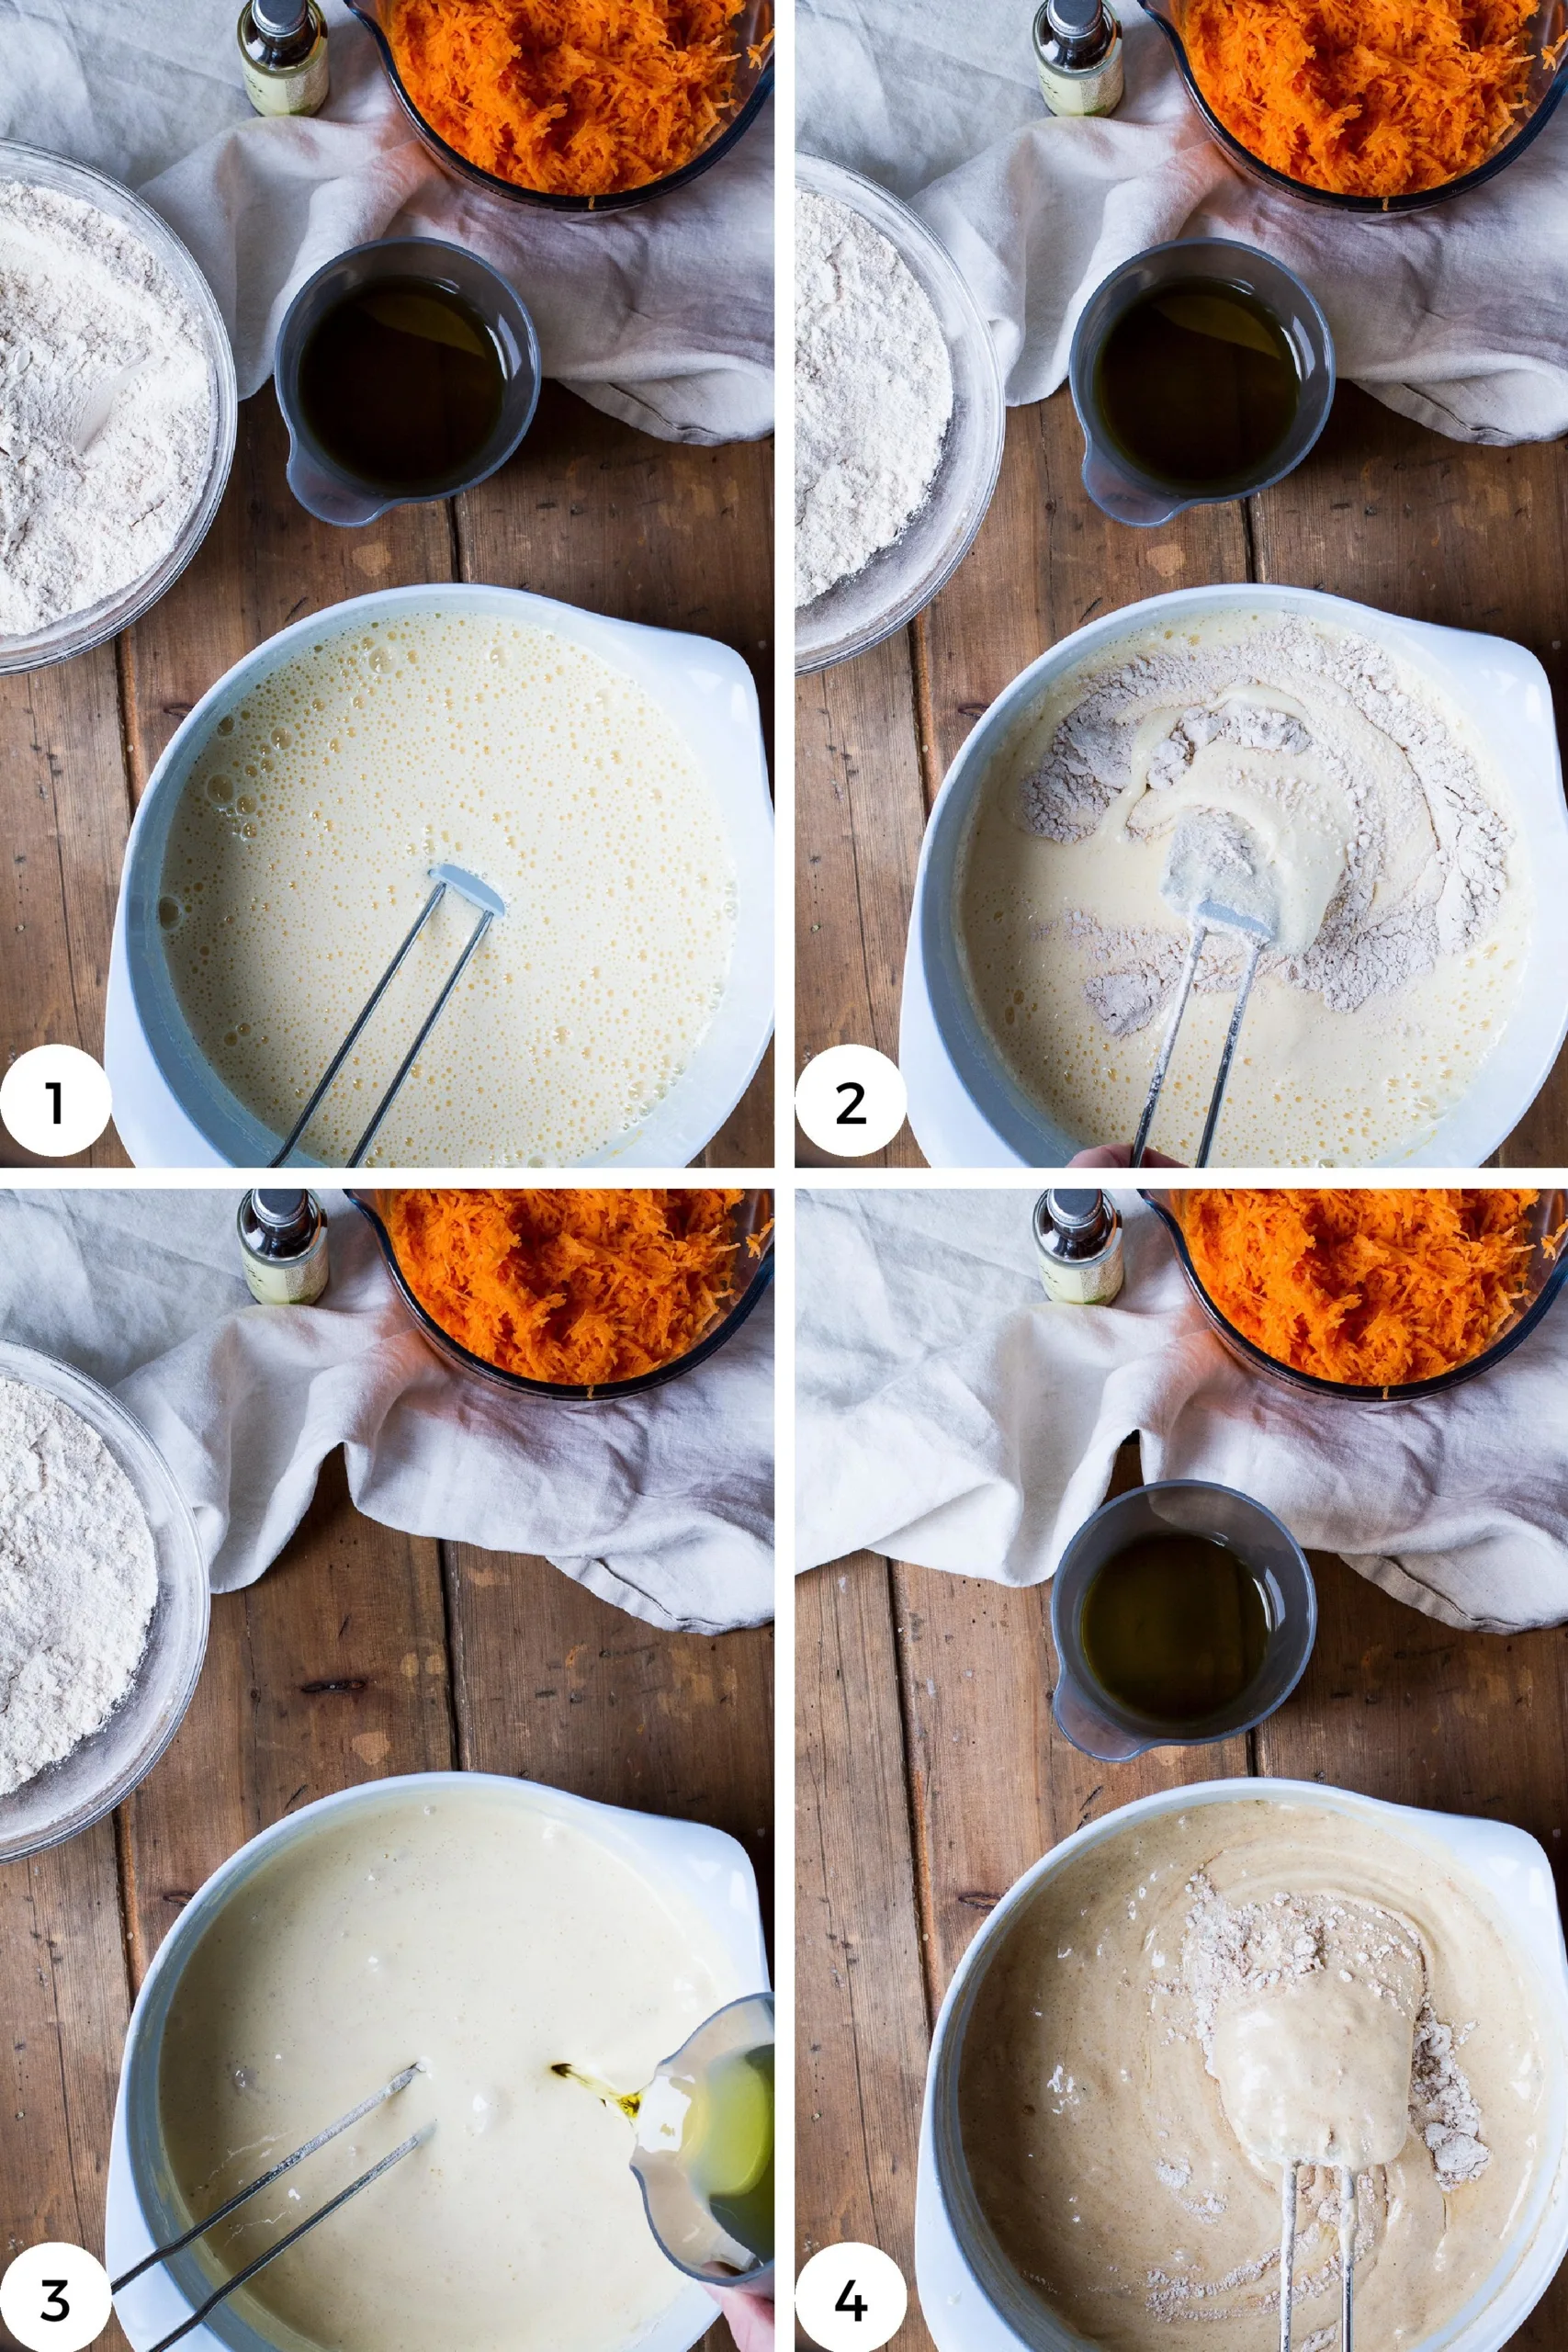 Steps to mix the batter